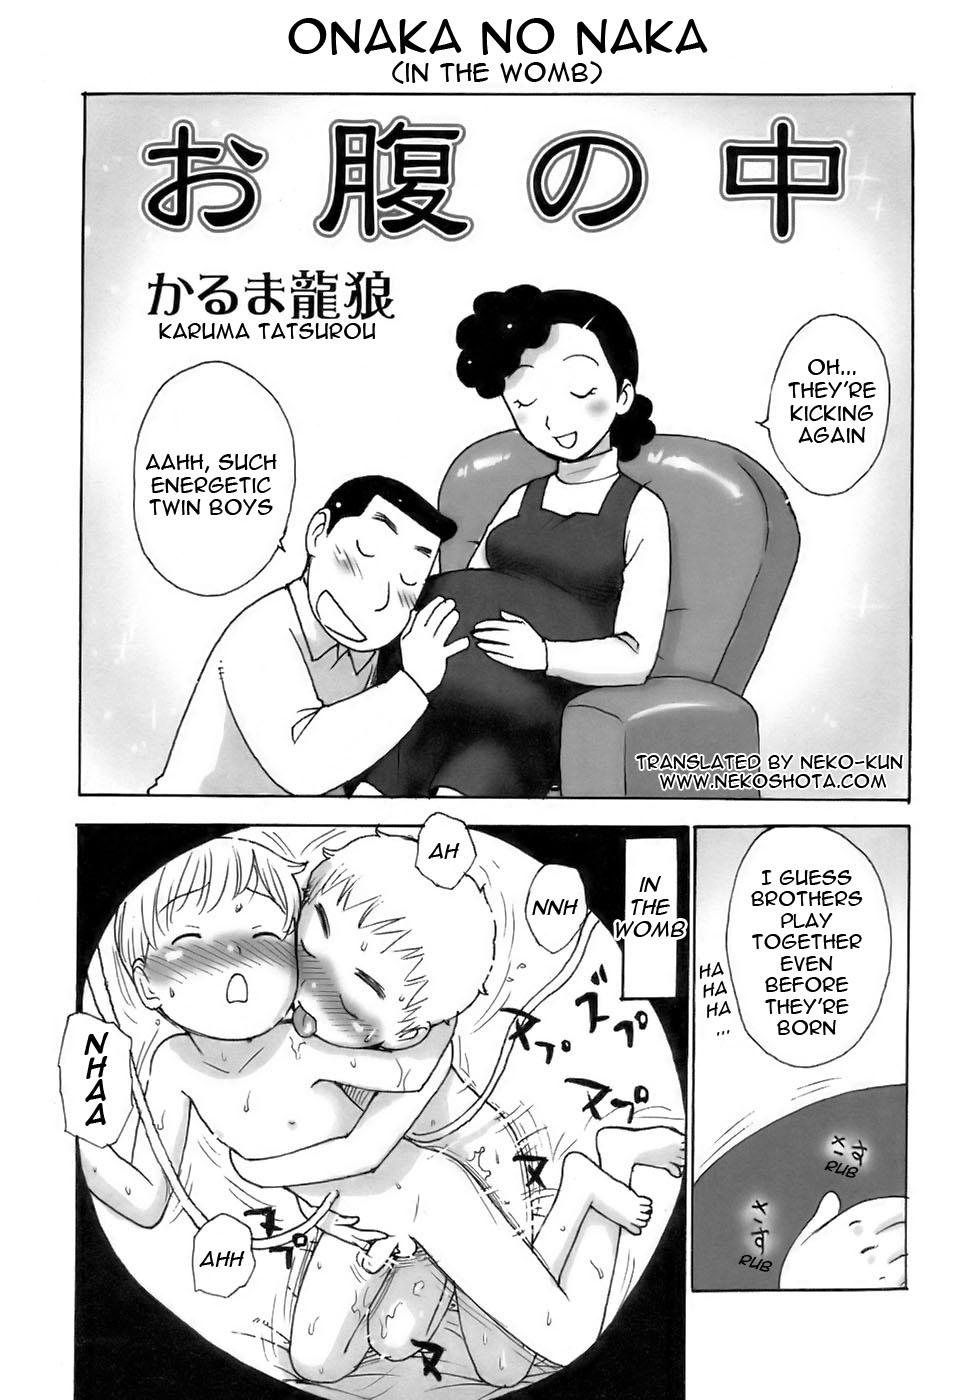 Free Blowjobs Onaka no Naka | In The Womb Longhair - Page 1